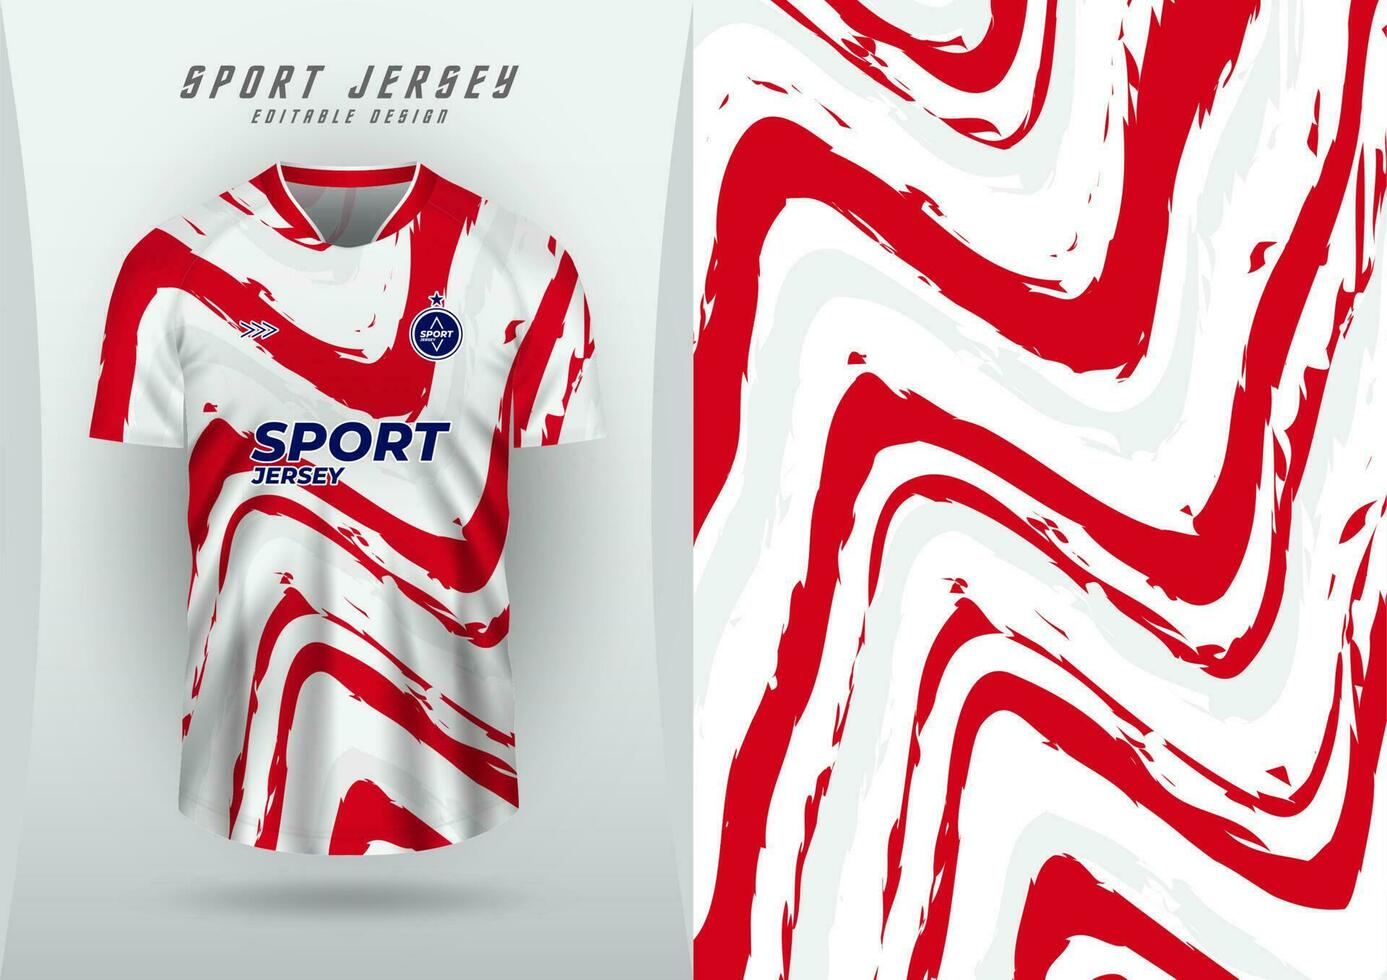 Background for sports jersey, soccer jersey, running jersey, racing jersey, red and white wave pattern. vector